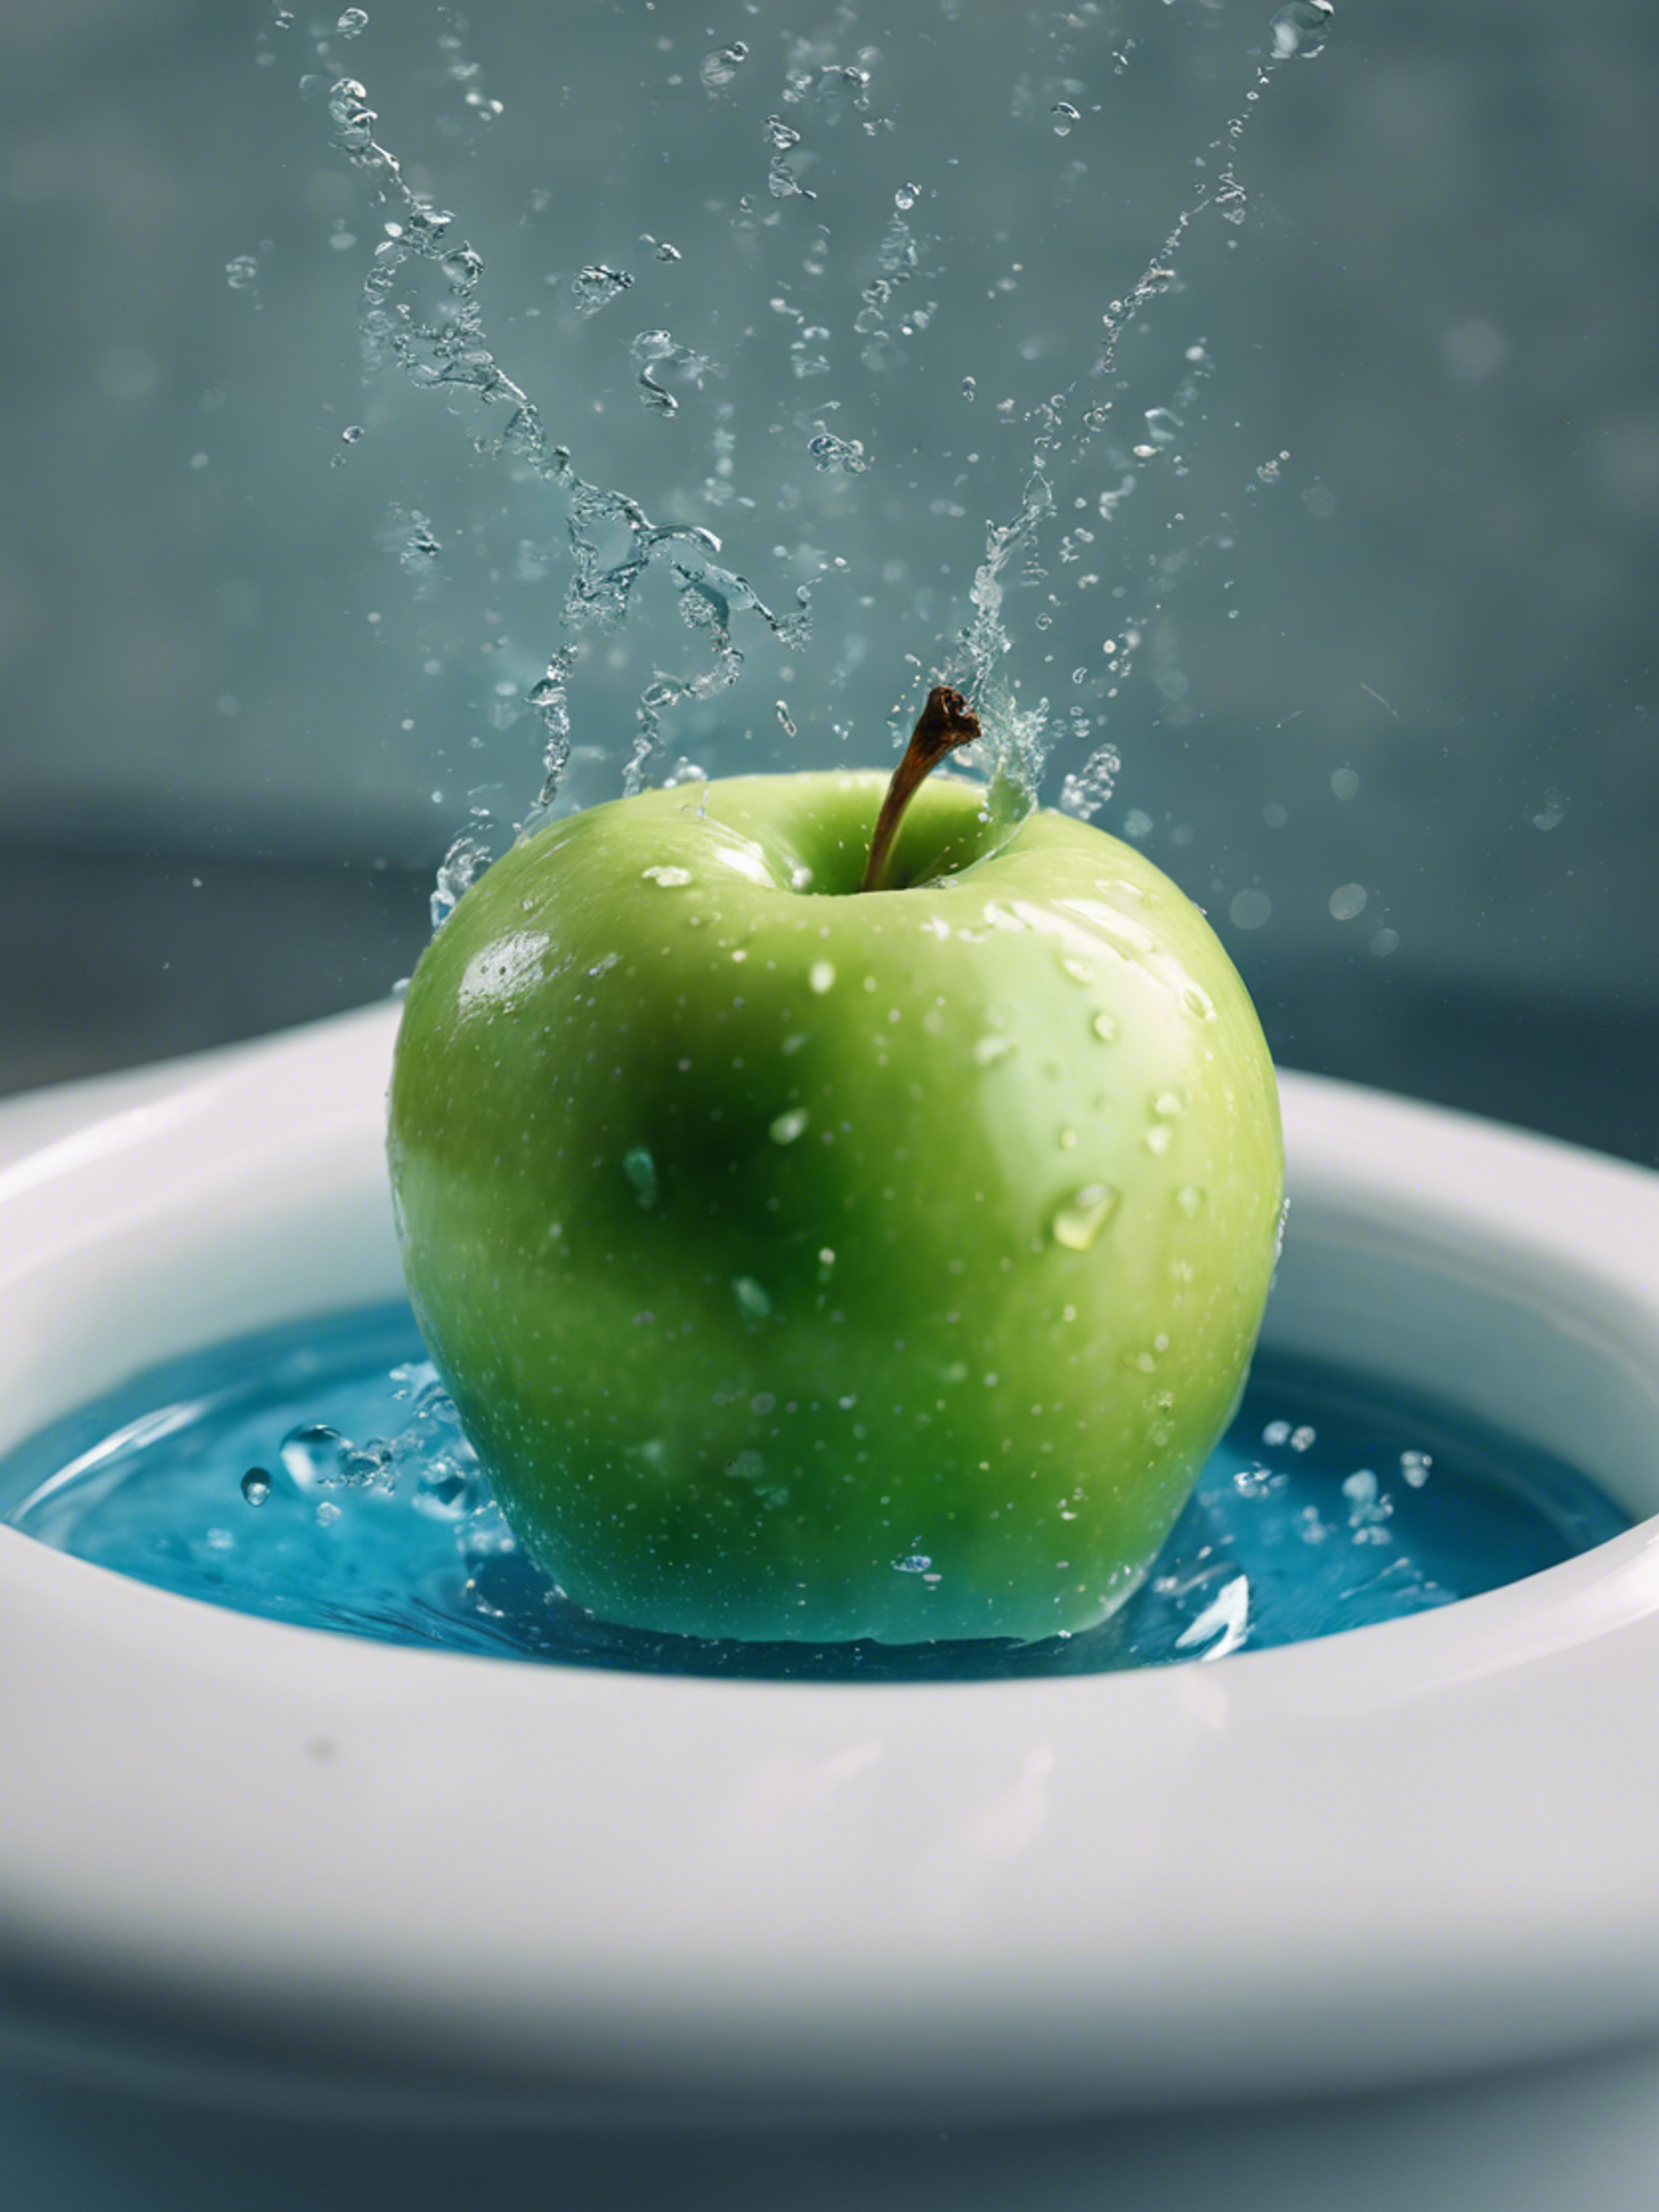 A green apple falling into a basin filled with azure blue water. Wallpaper[a9bb5407cd4a4f929343]